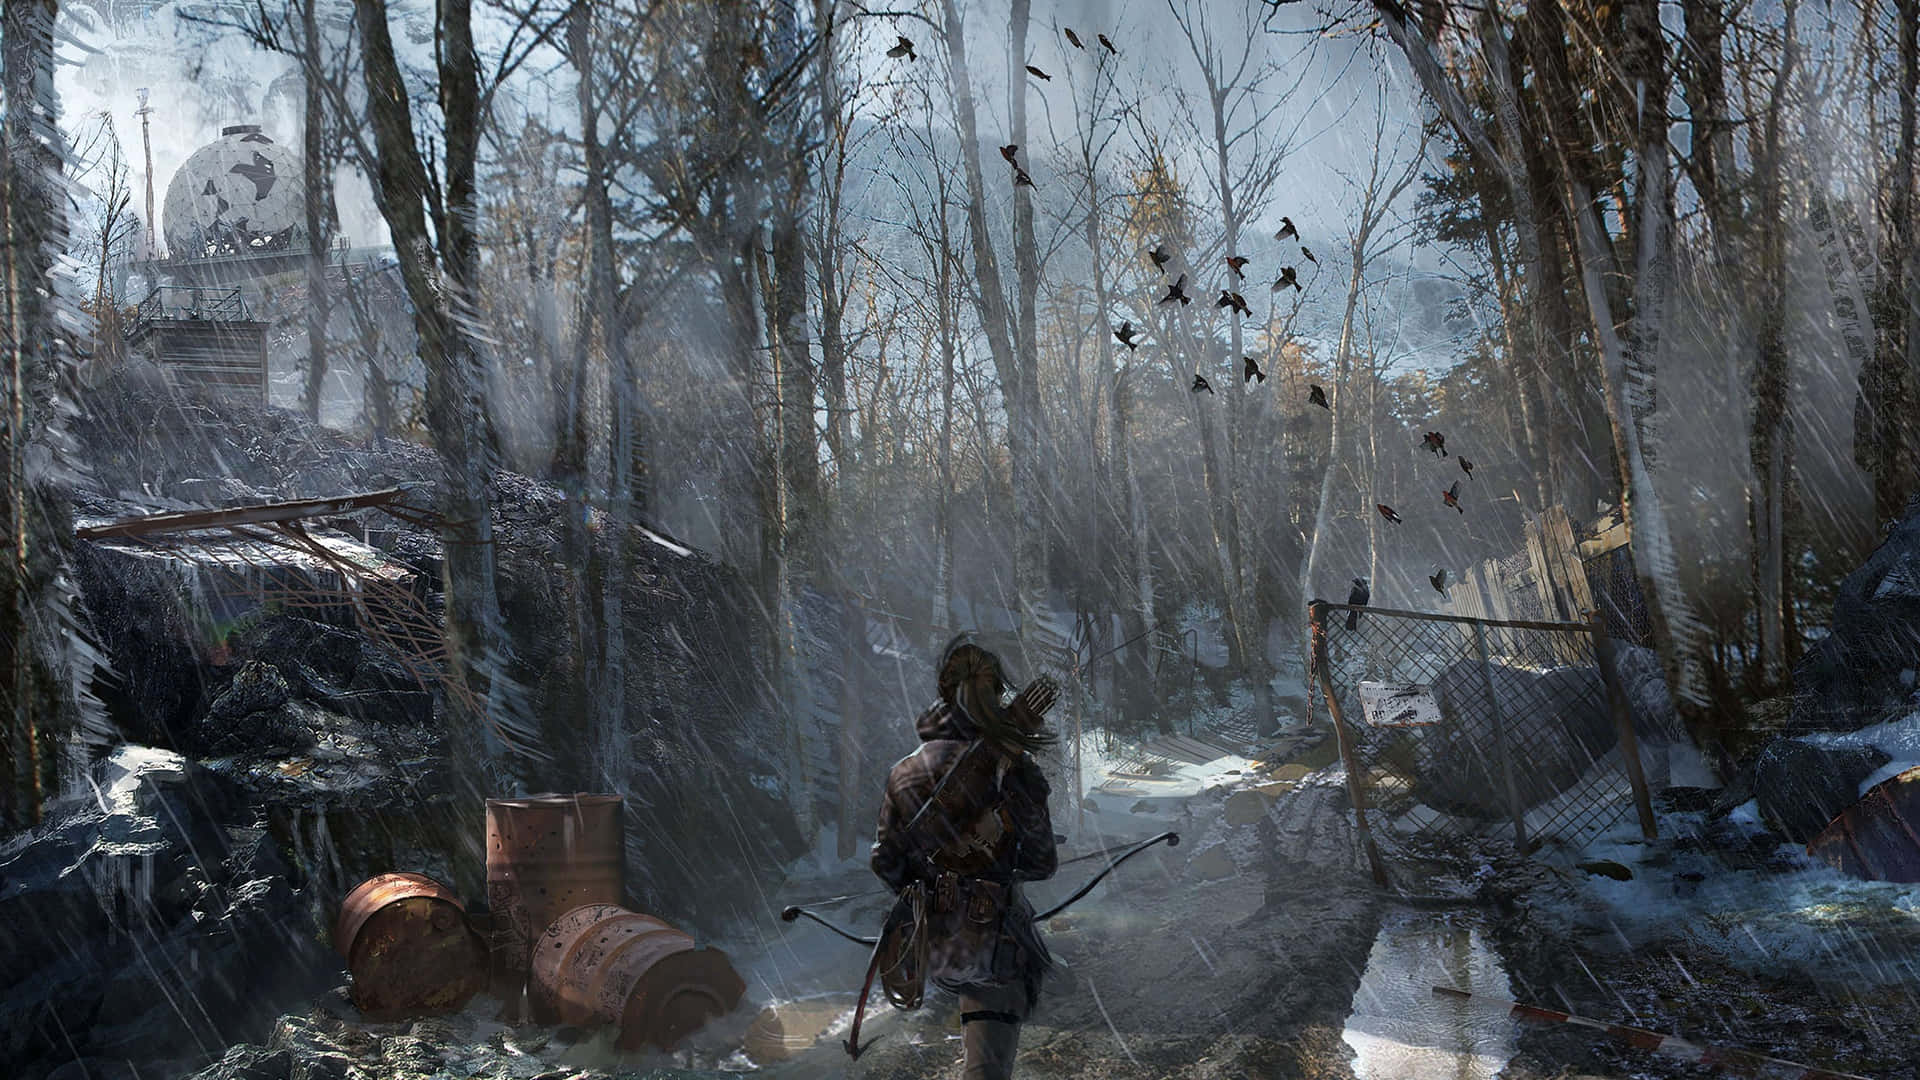 Lara Croft faces off against a powerful enemy in Rise Of The Tomb Raider